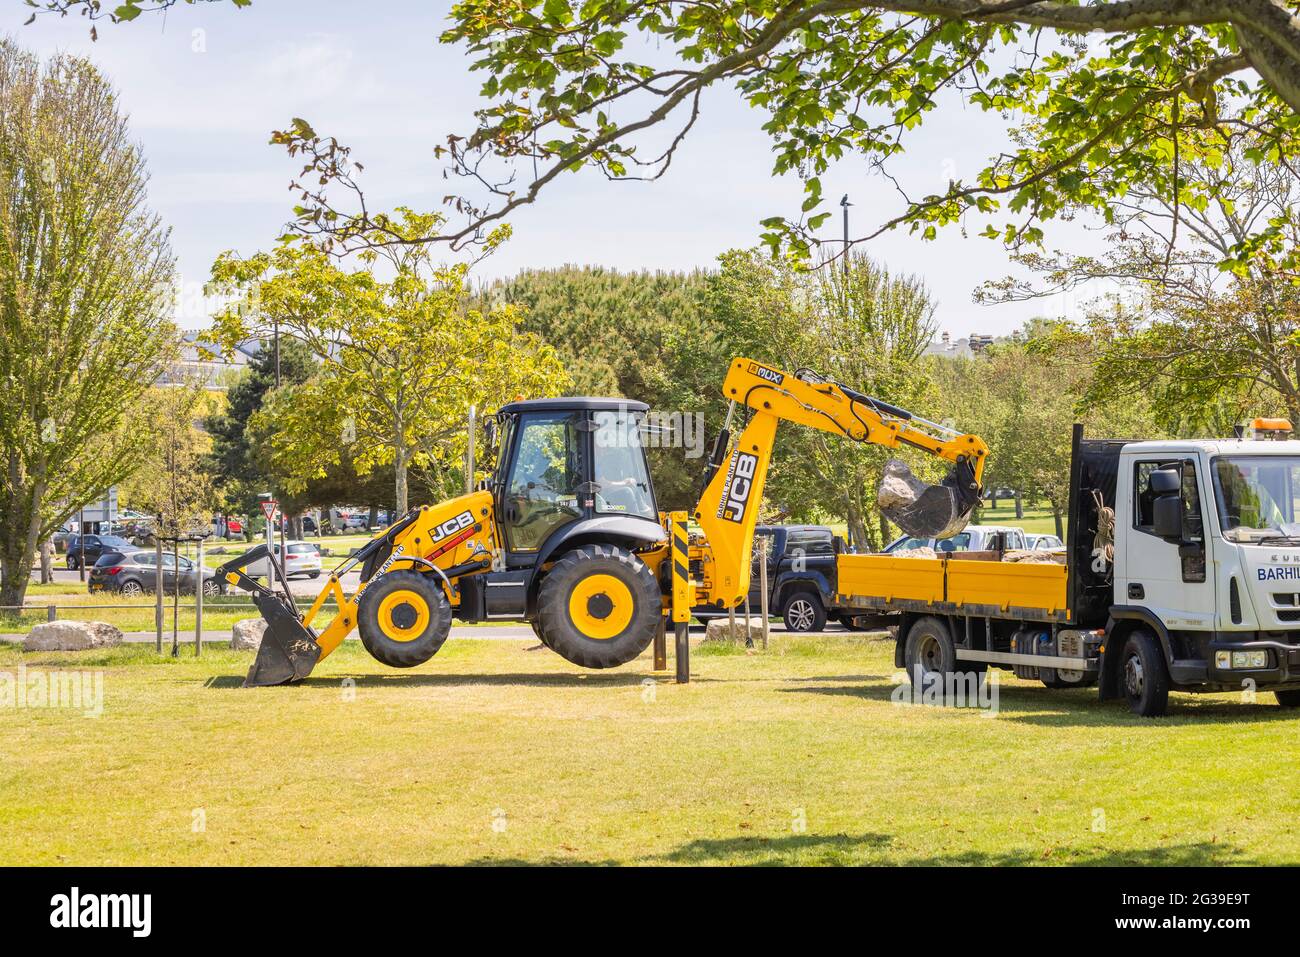 A yellow JCB 3CX Eco backhoe loader working in a park in Southsea, Portsmouth, Hampshire, south coast England raised on its supporting legs Stock Photo